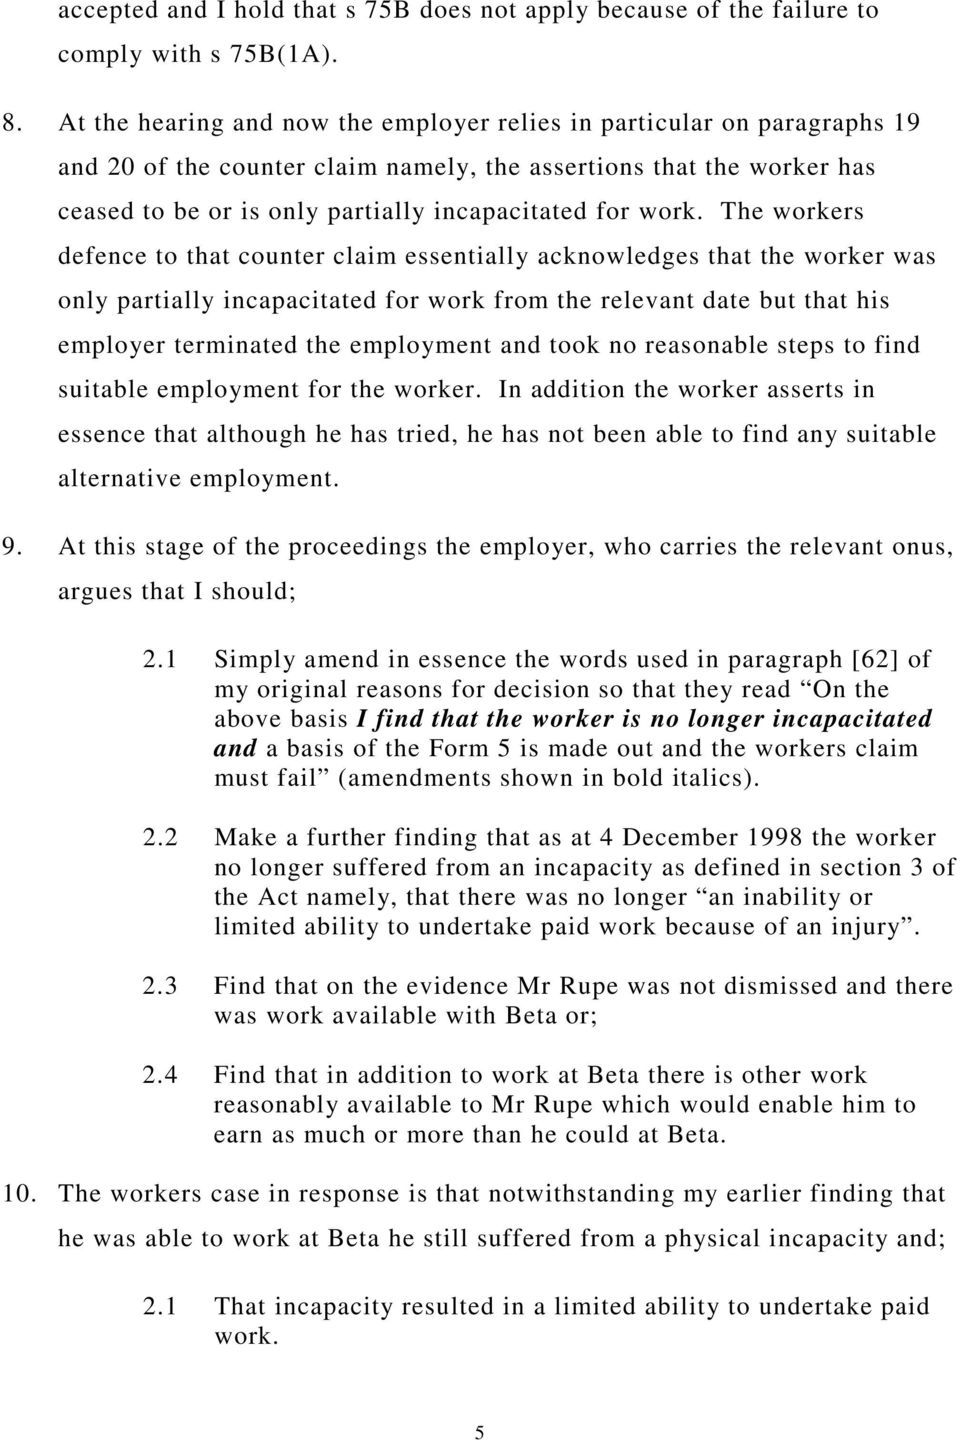 work. The workers defence to that counter claim essentially acknowledges that the worker was only partially incapacitated for work from the relevant date but that his employer terminated the